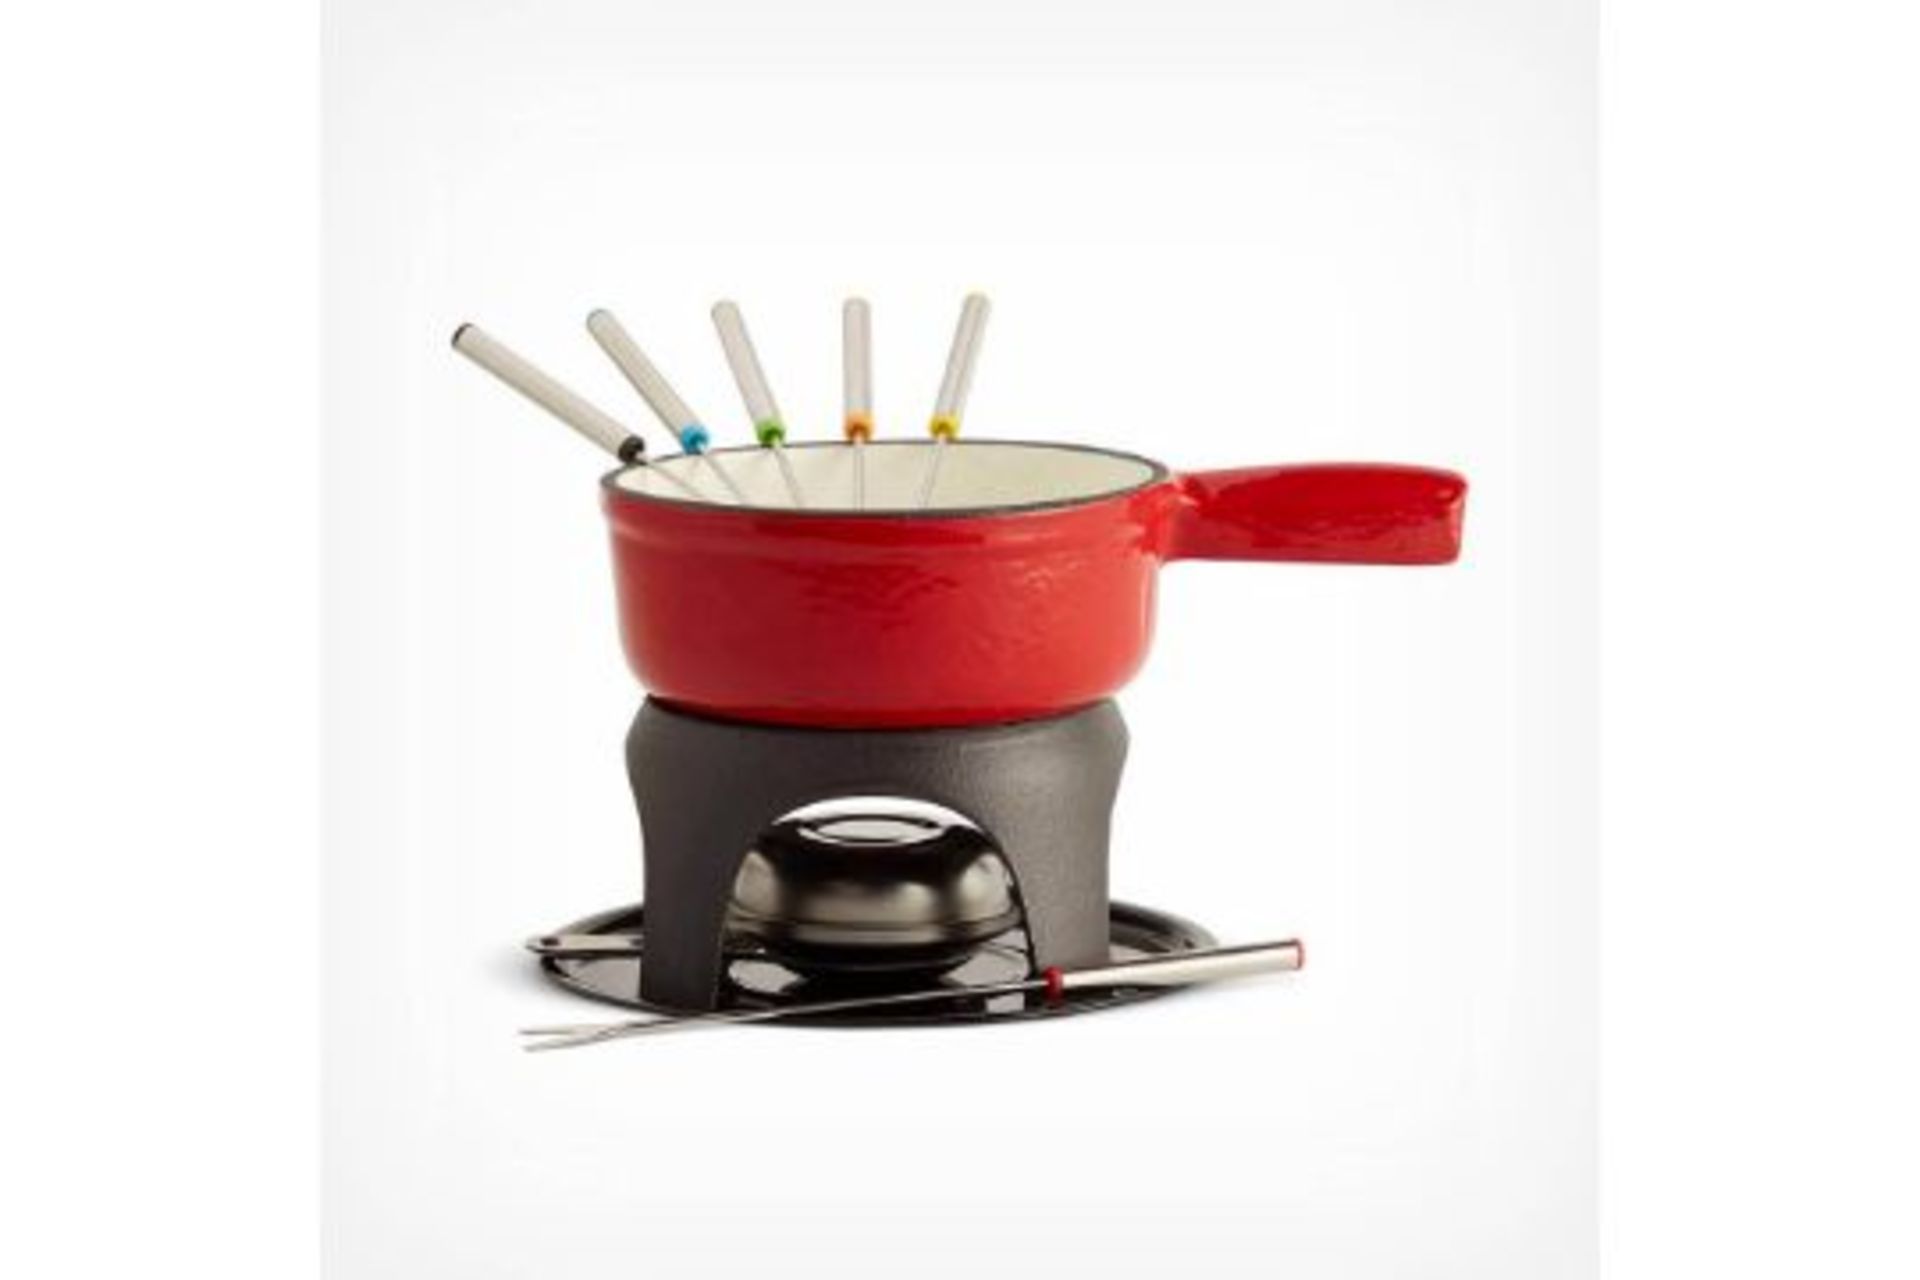 Swiss Fondue Set. - BI. Whether you’re dipping strawberries into chocolate or sourdough into